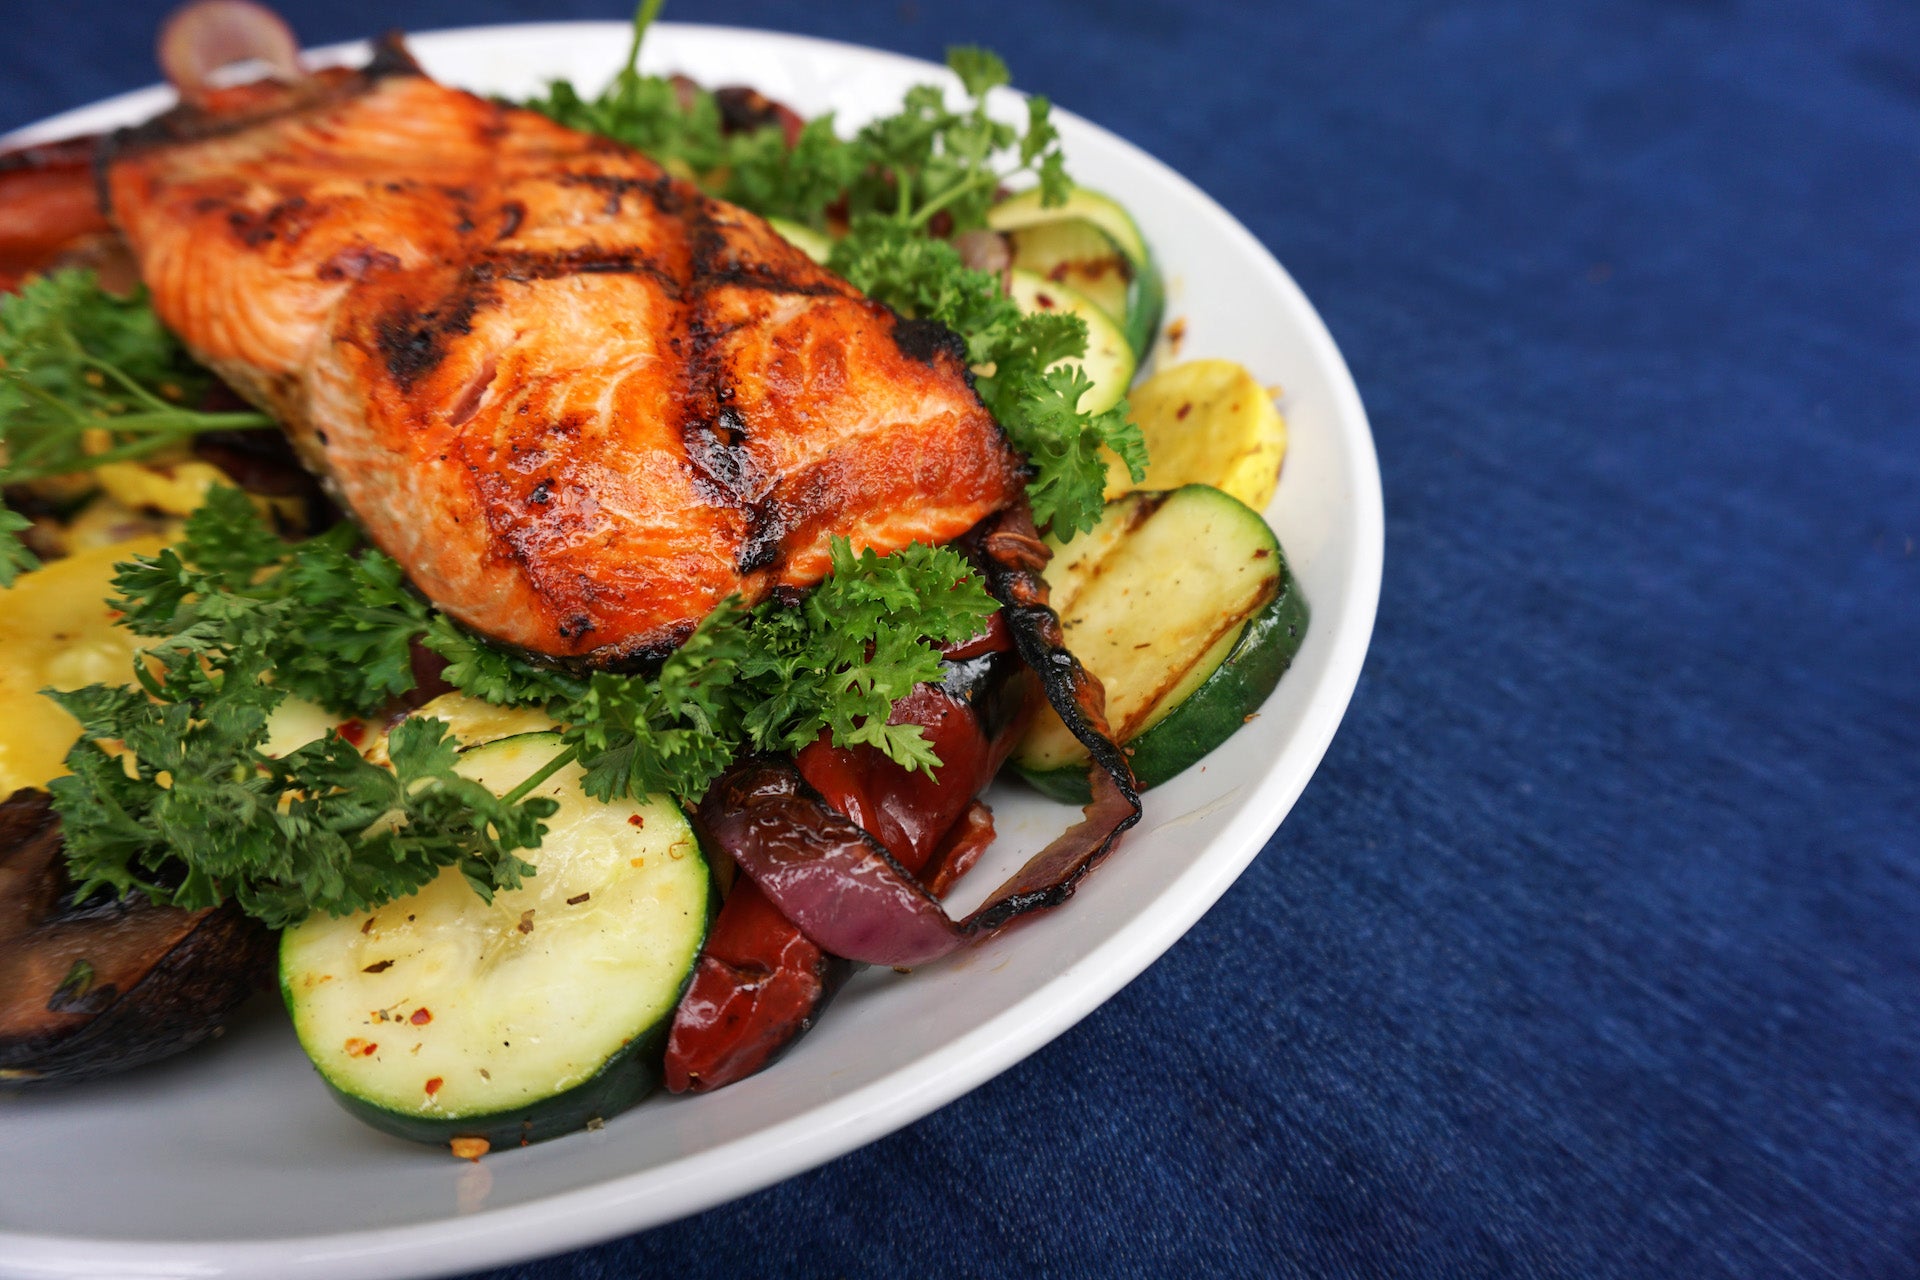 Grilled Salmon and Vegetables